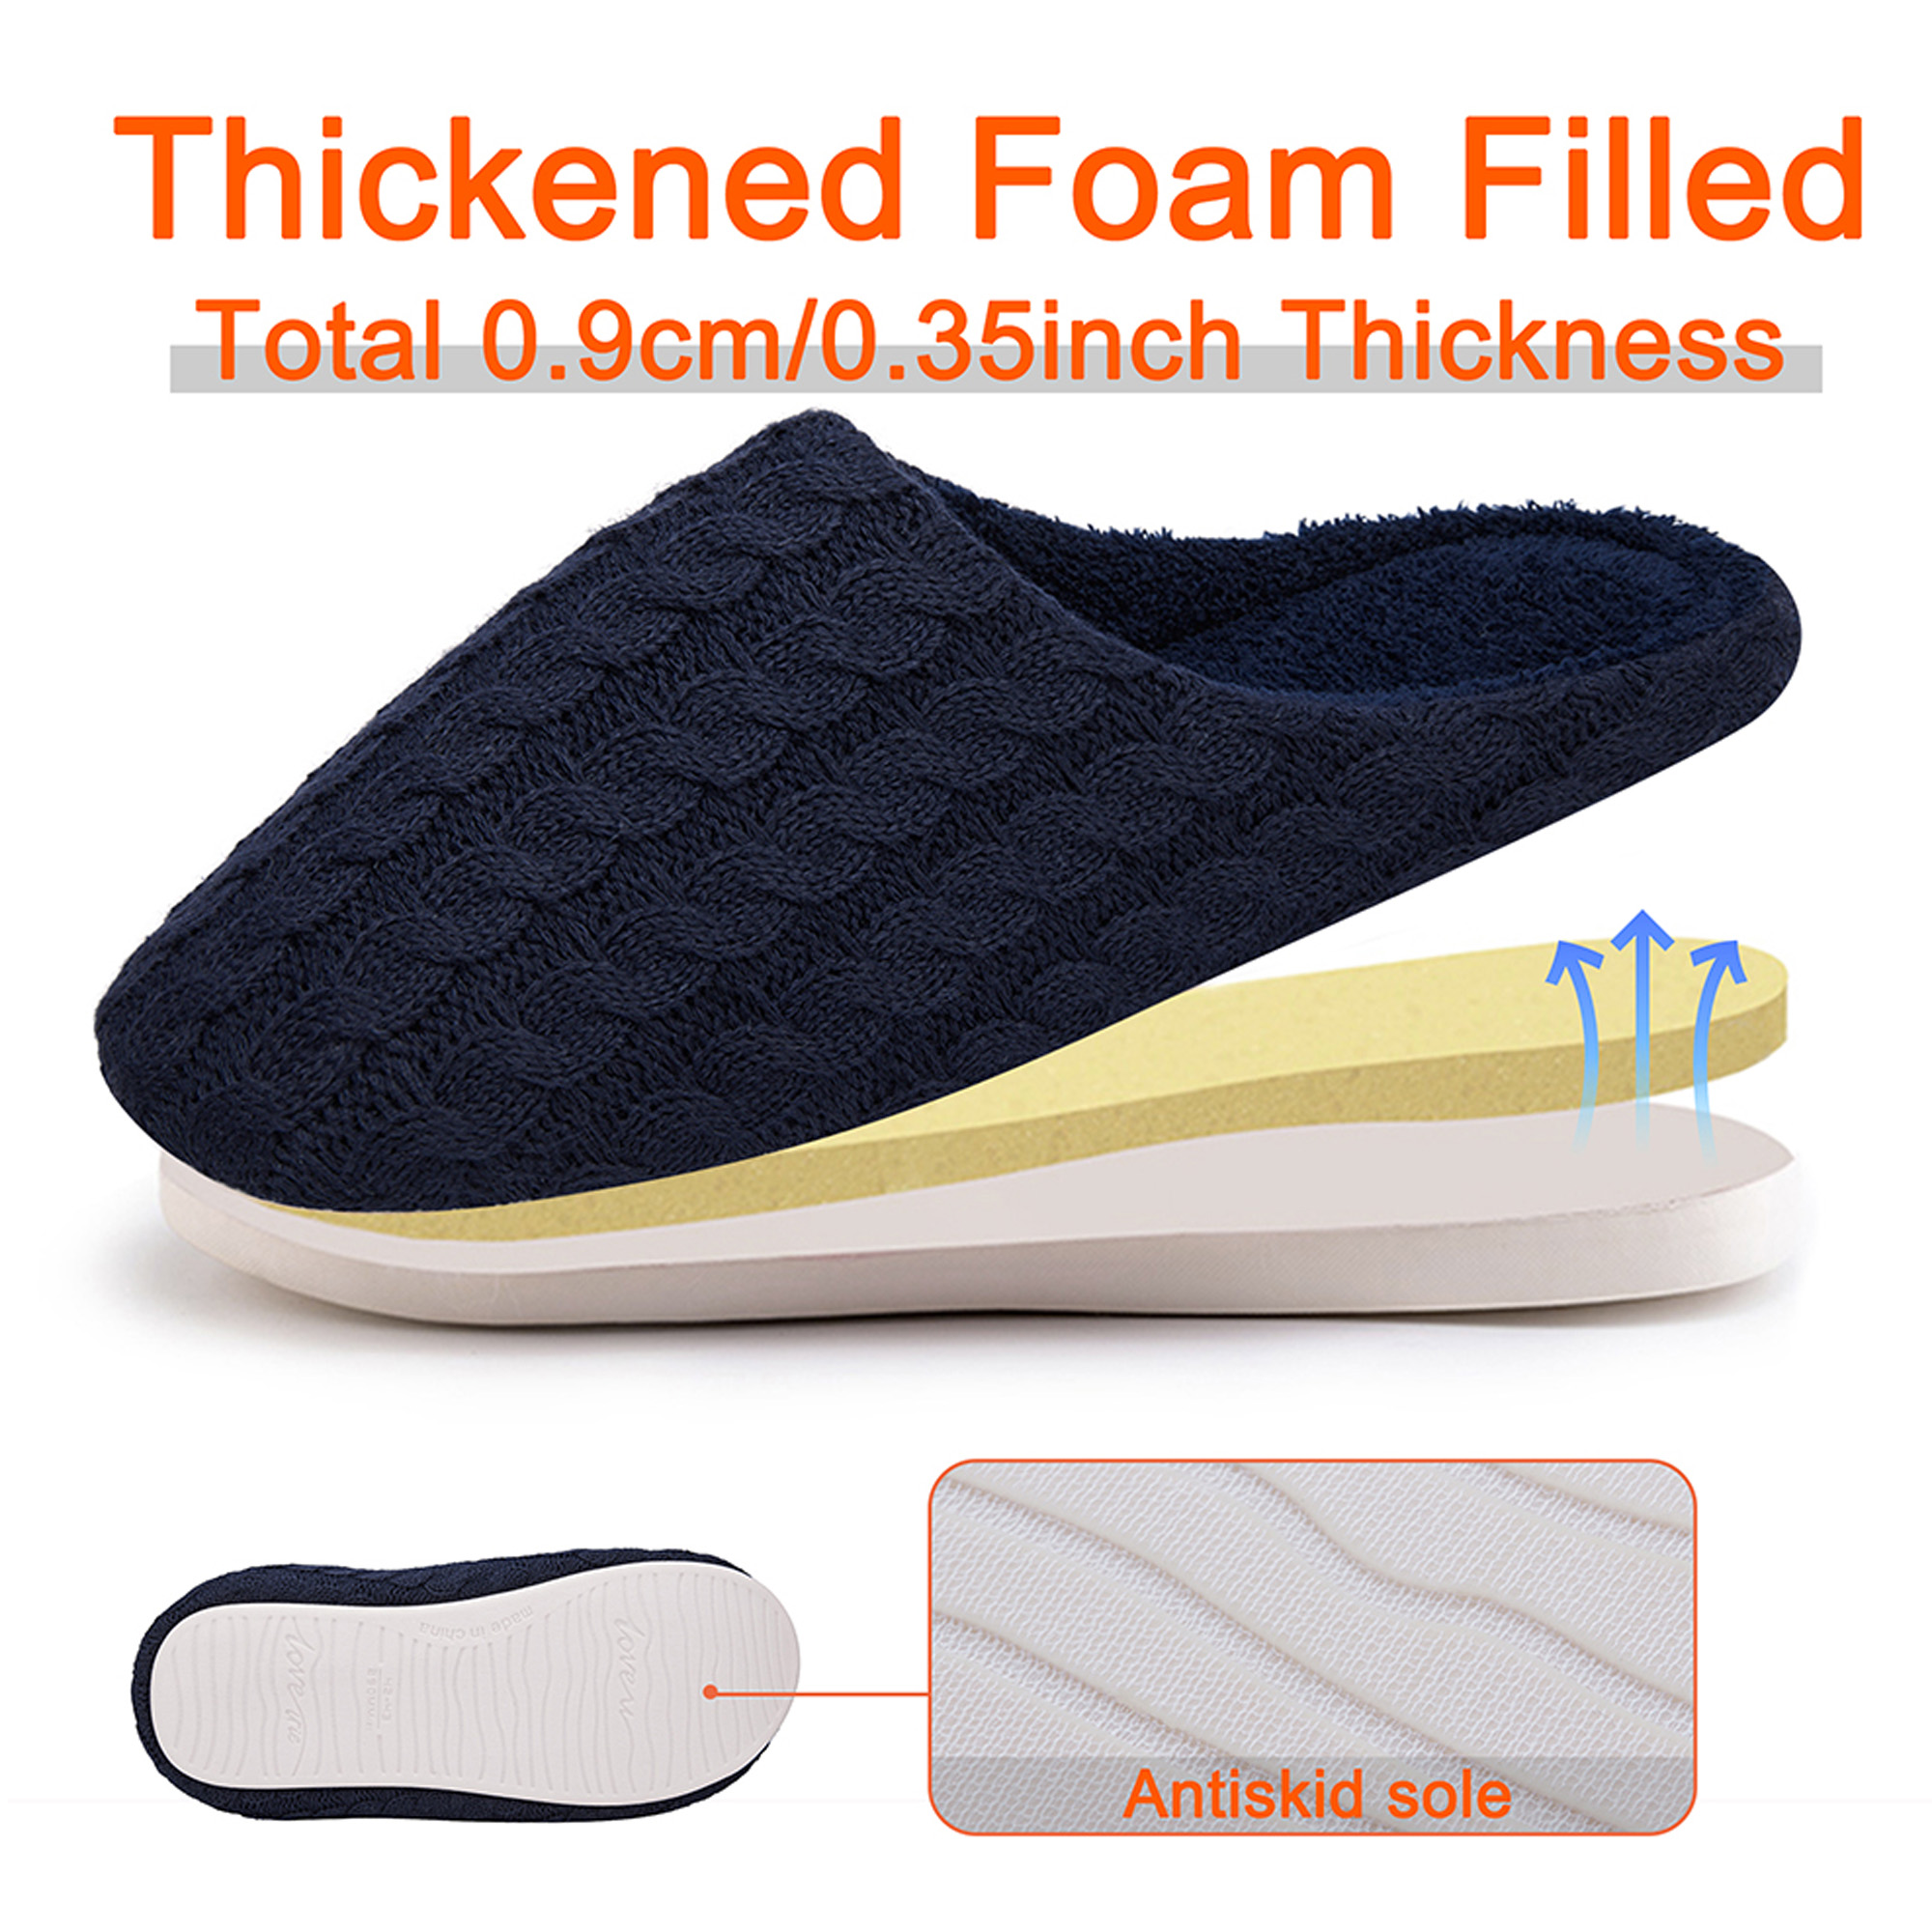 DODOING Women's Memory Foam Insole Breathable Cotton Upper Slippers with Cozy Short Plush Lining - image 4 of 8